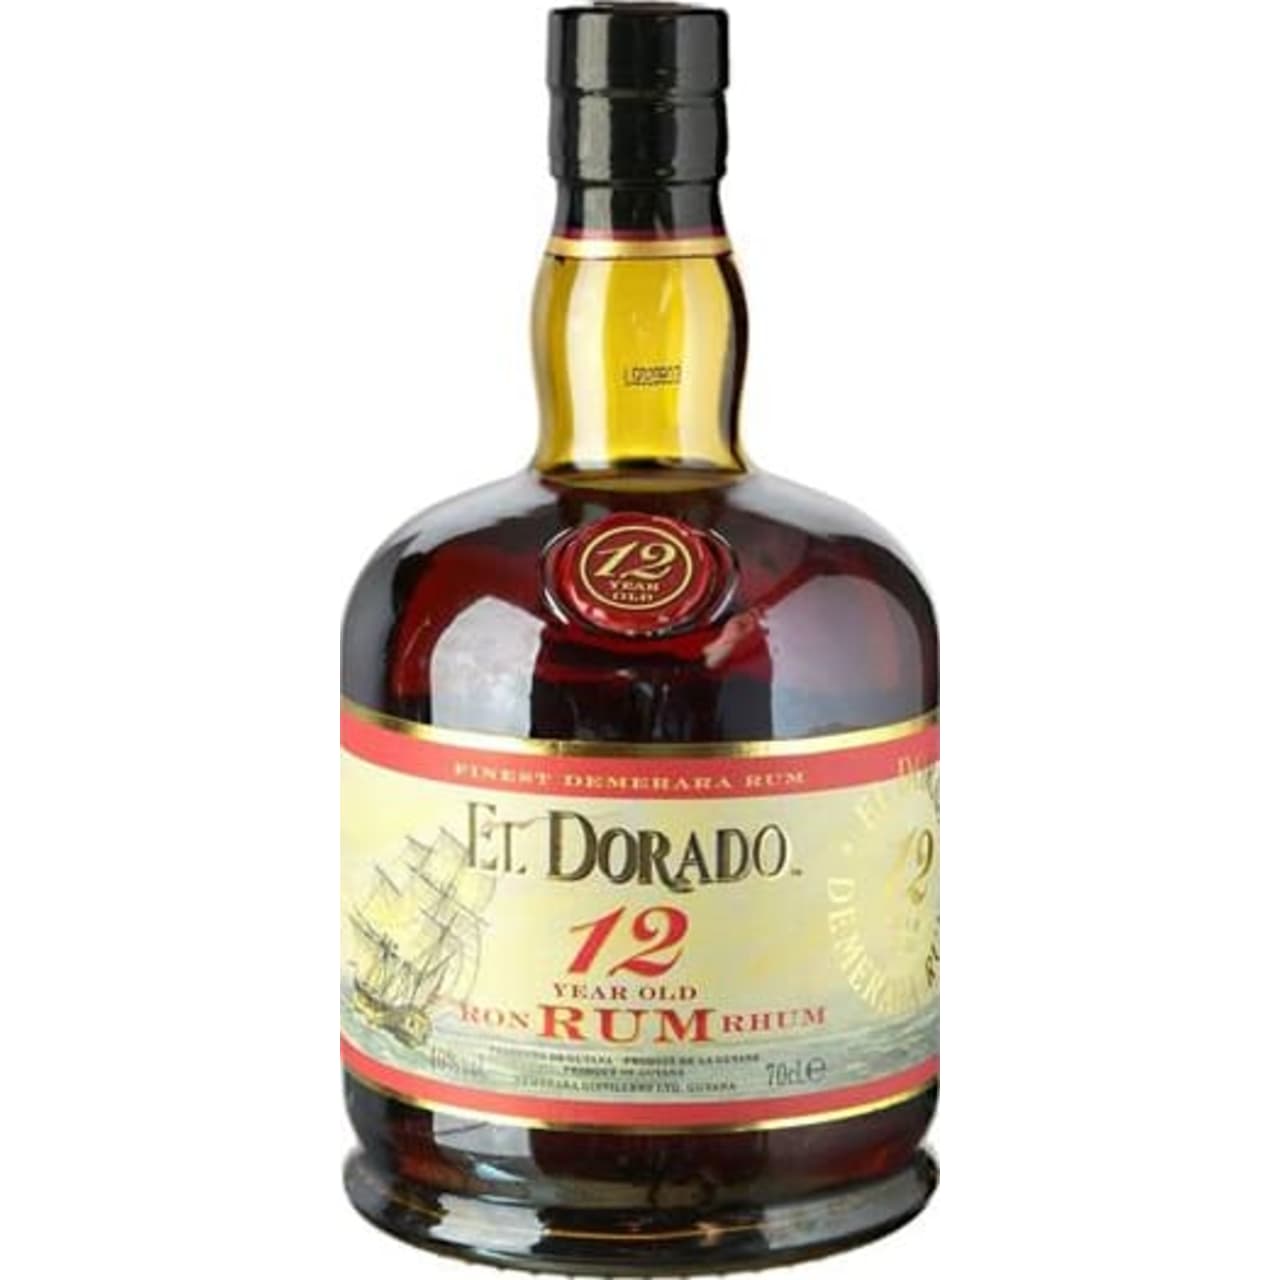 El Dorado 12 Year Old Rum has been laid down in oak barrels for at least 12 years producing a rich and diverse spirit. Rich amber in colour. A super attractive nose packed with aromas of sugar, honey, banana, toffee, raisin and sultanas. Ripe, rich and balanced flavours attend with sweetness, after which the finish is elegant and dry.